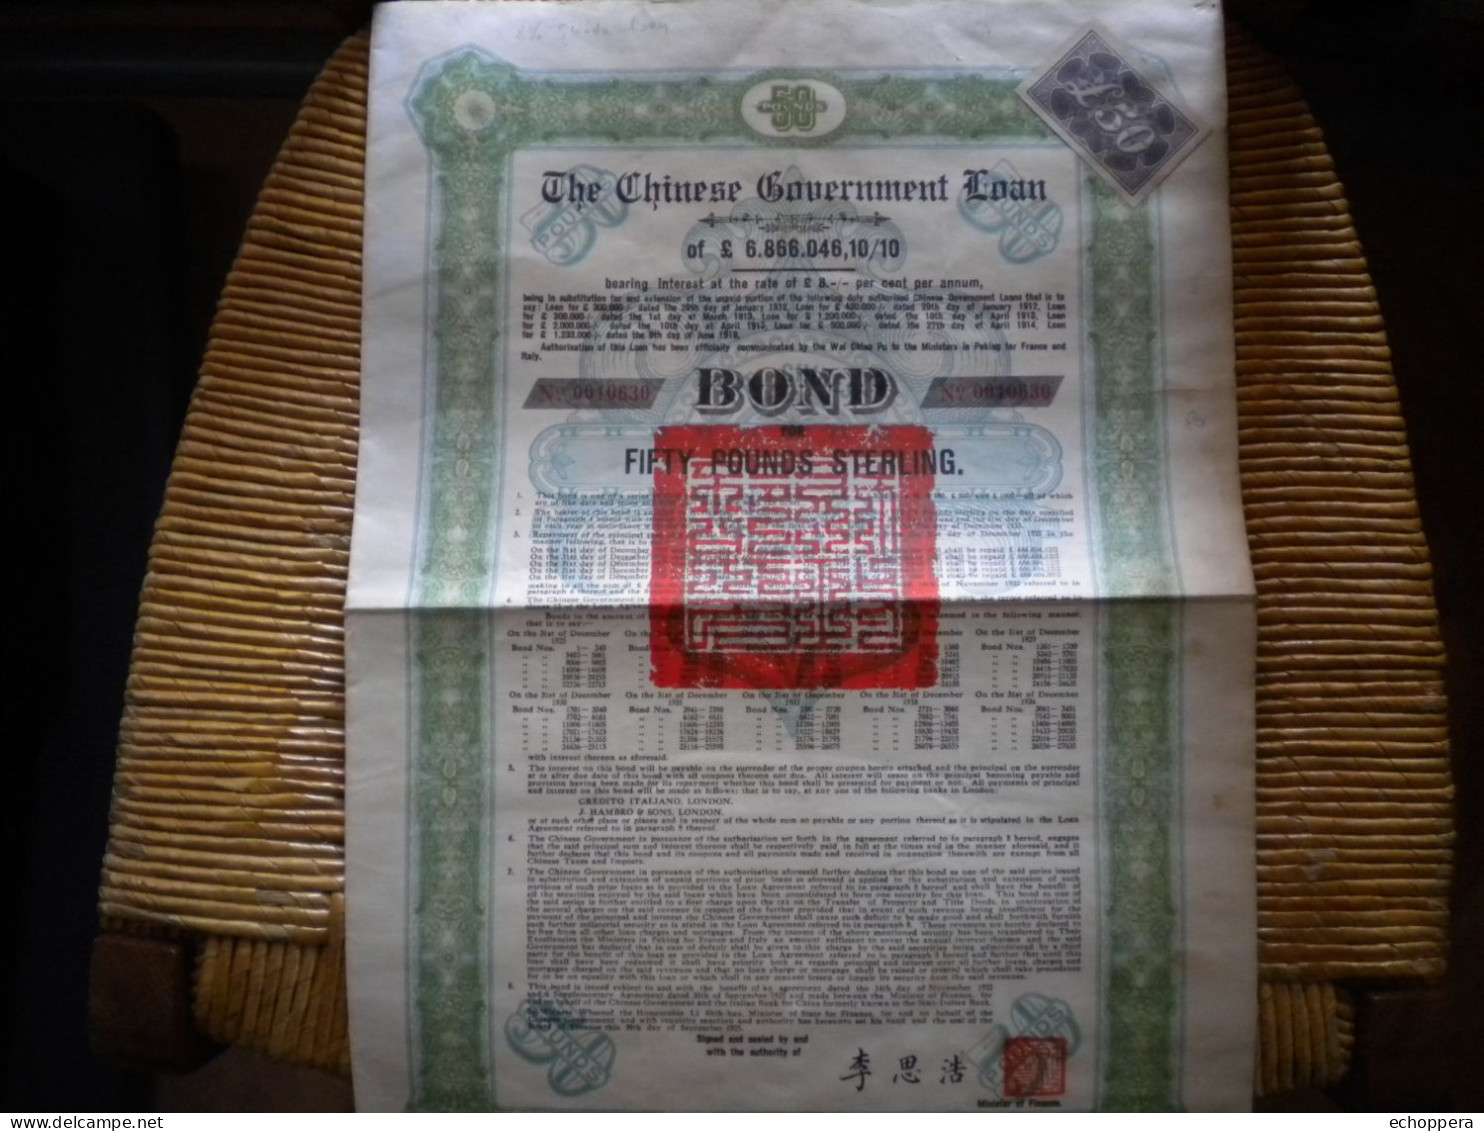 THE CHINESE GOVERNMENT LOAN - 50 £ Sterling  8%  CANTON KOWLOON RAILWAYS - 1925 - Azië